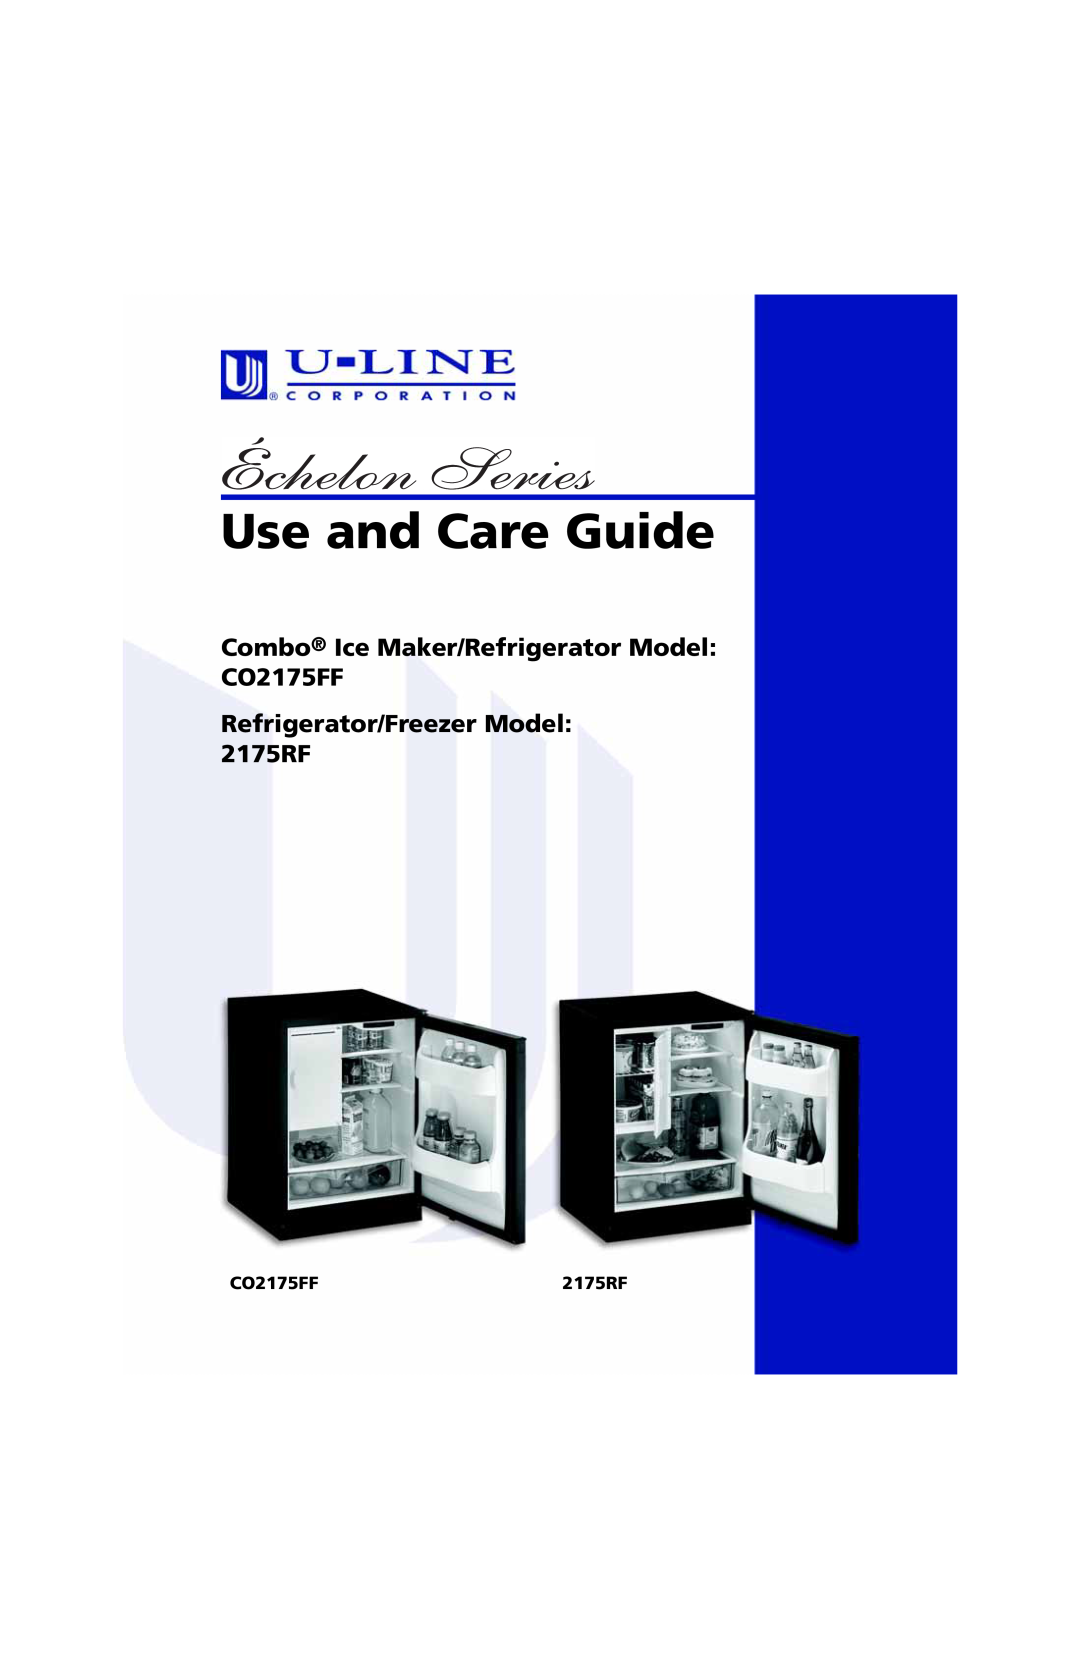 U-Line CO2175RF manual Use and Care Guide, Combo Ice Maker/Refrigerator Model: CO2175FF 